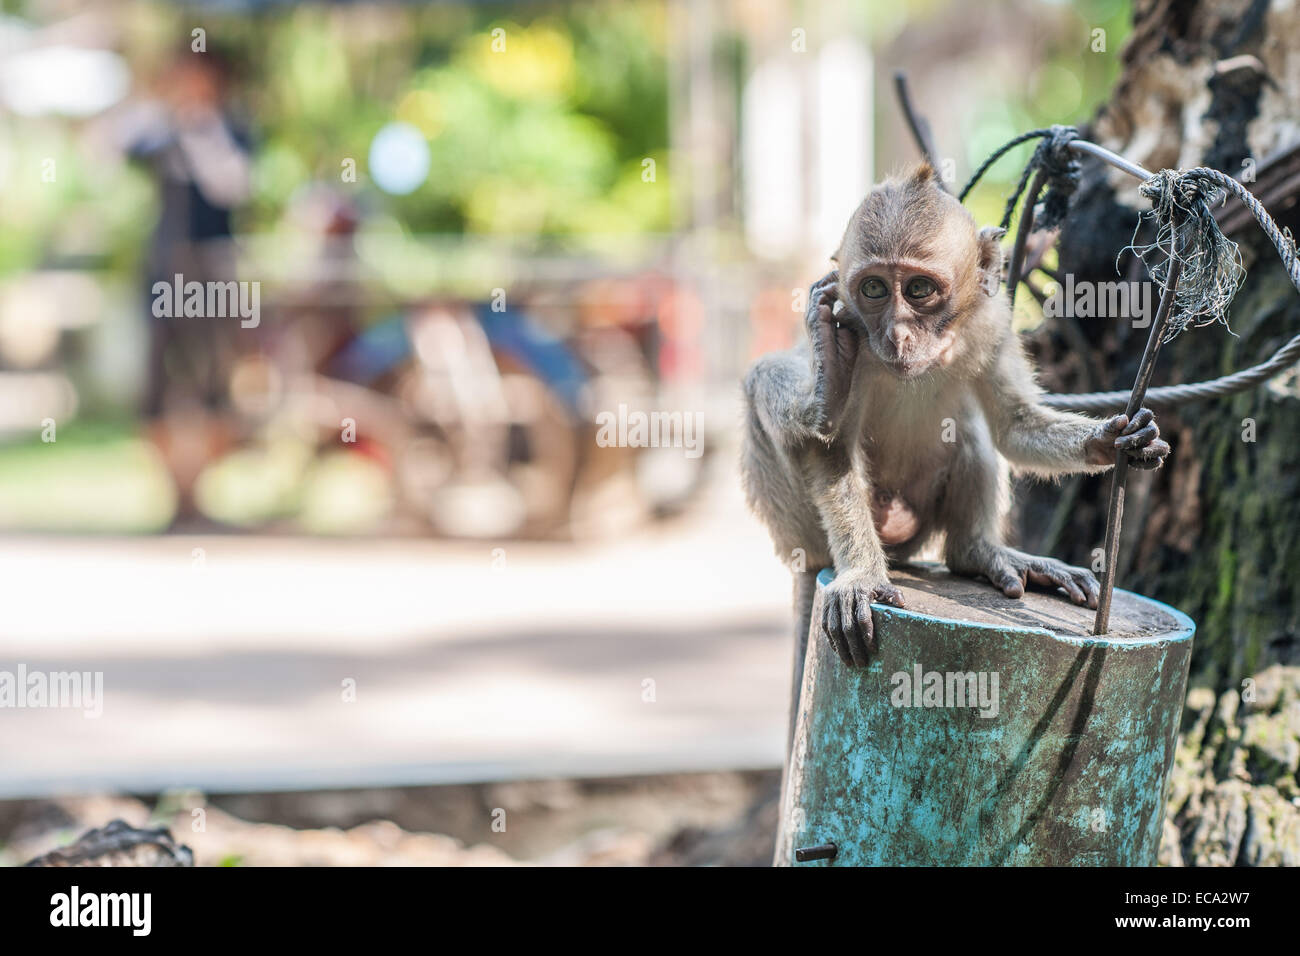 Baby monkey holding a cable for support Stock Photo